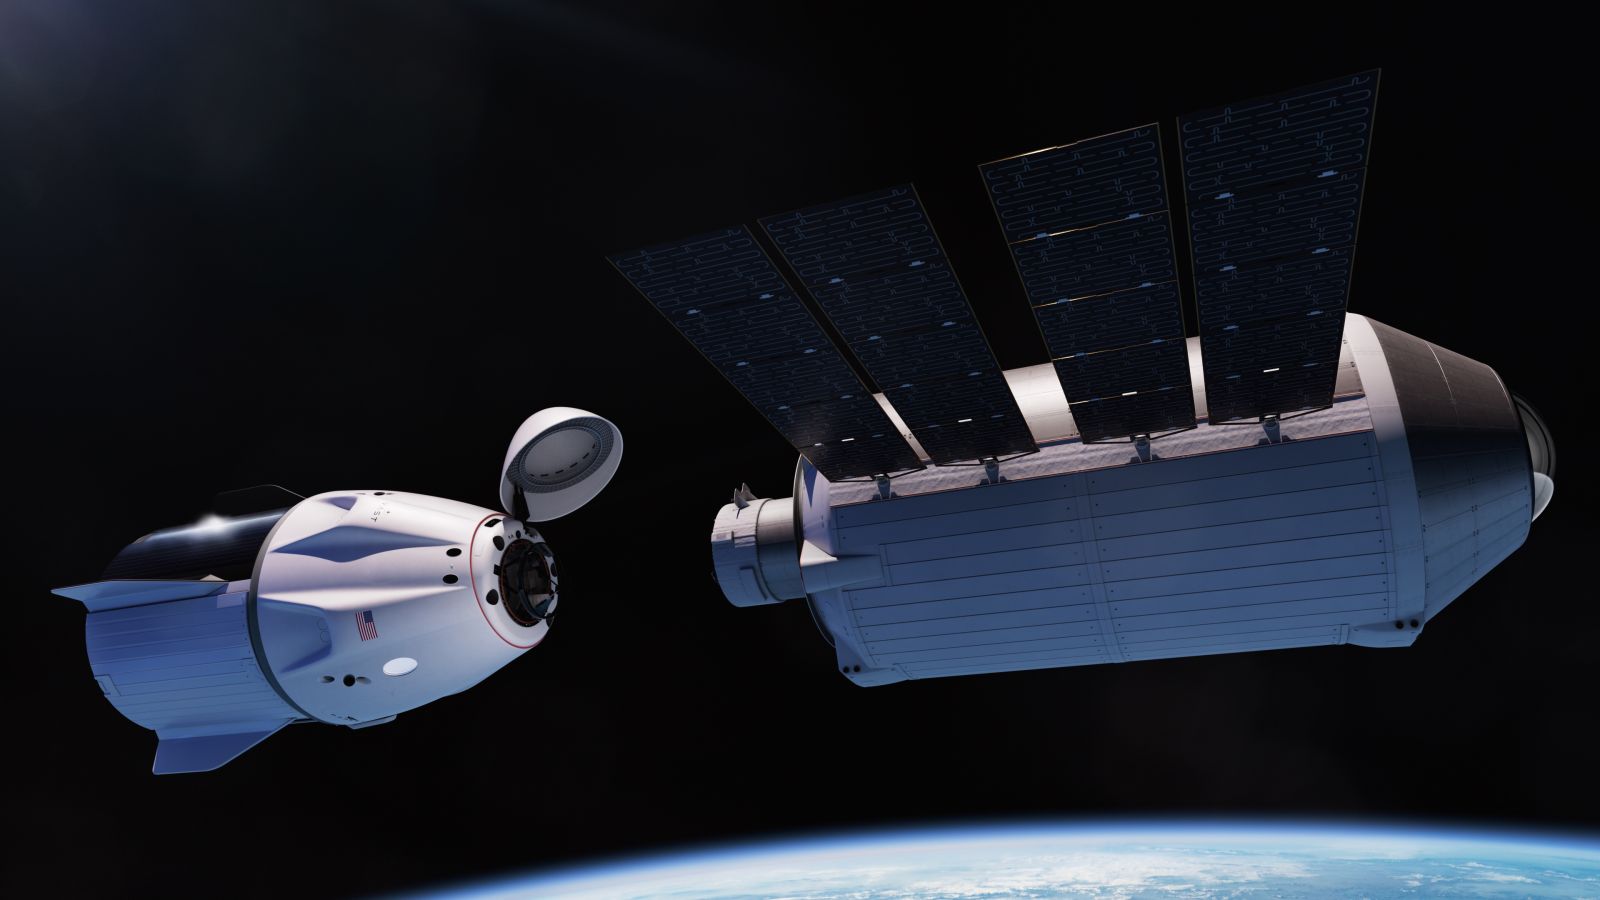 Vast Announces Plans to Launch First Private Space Station, Haven-1, in 2025